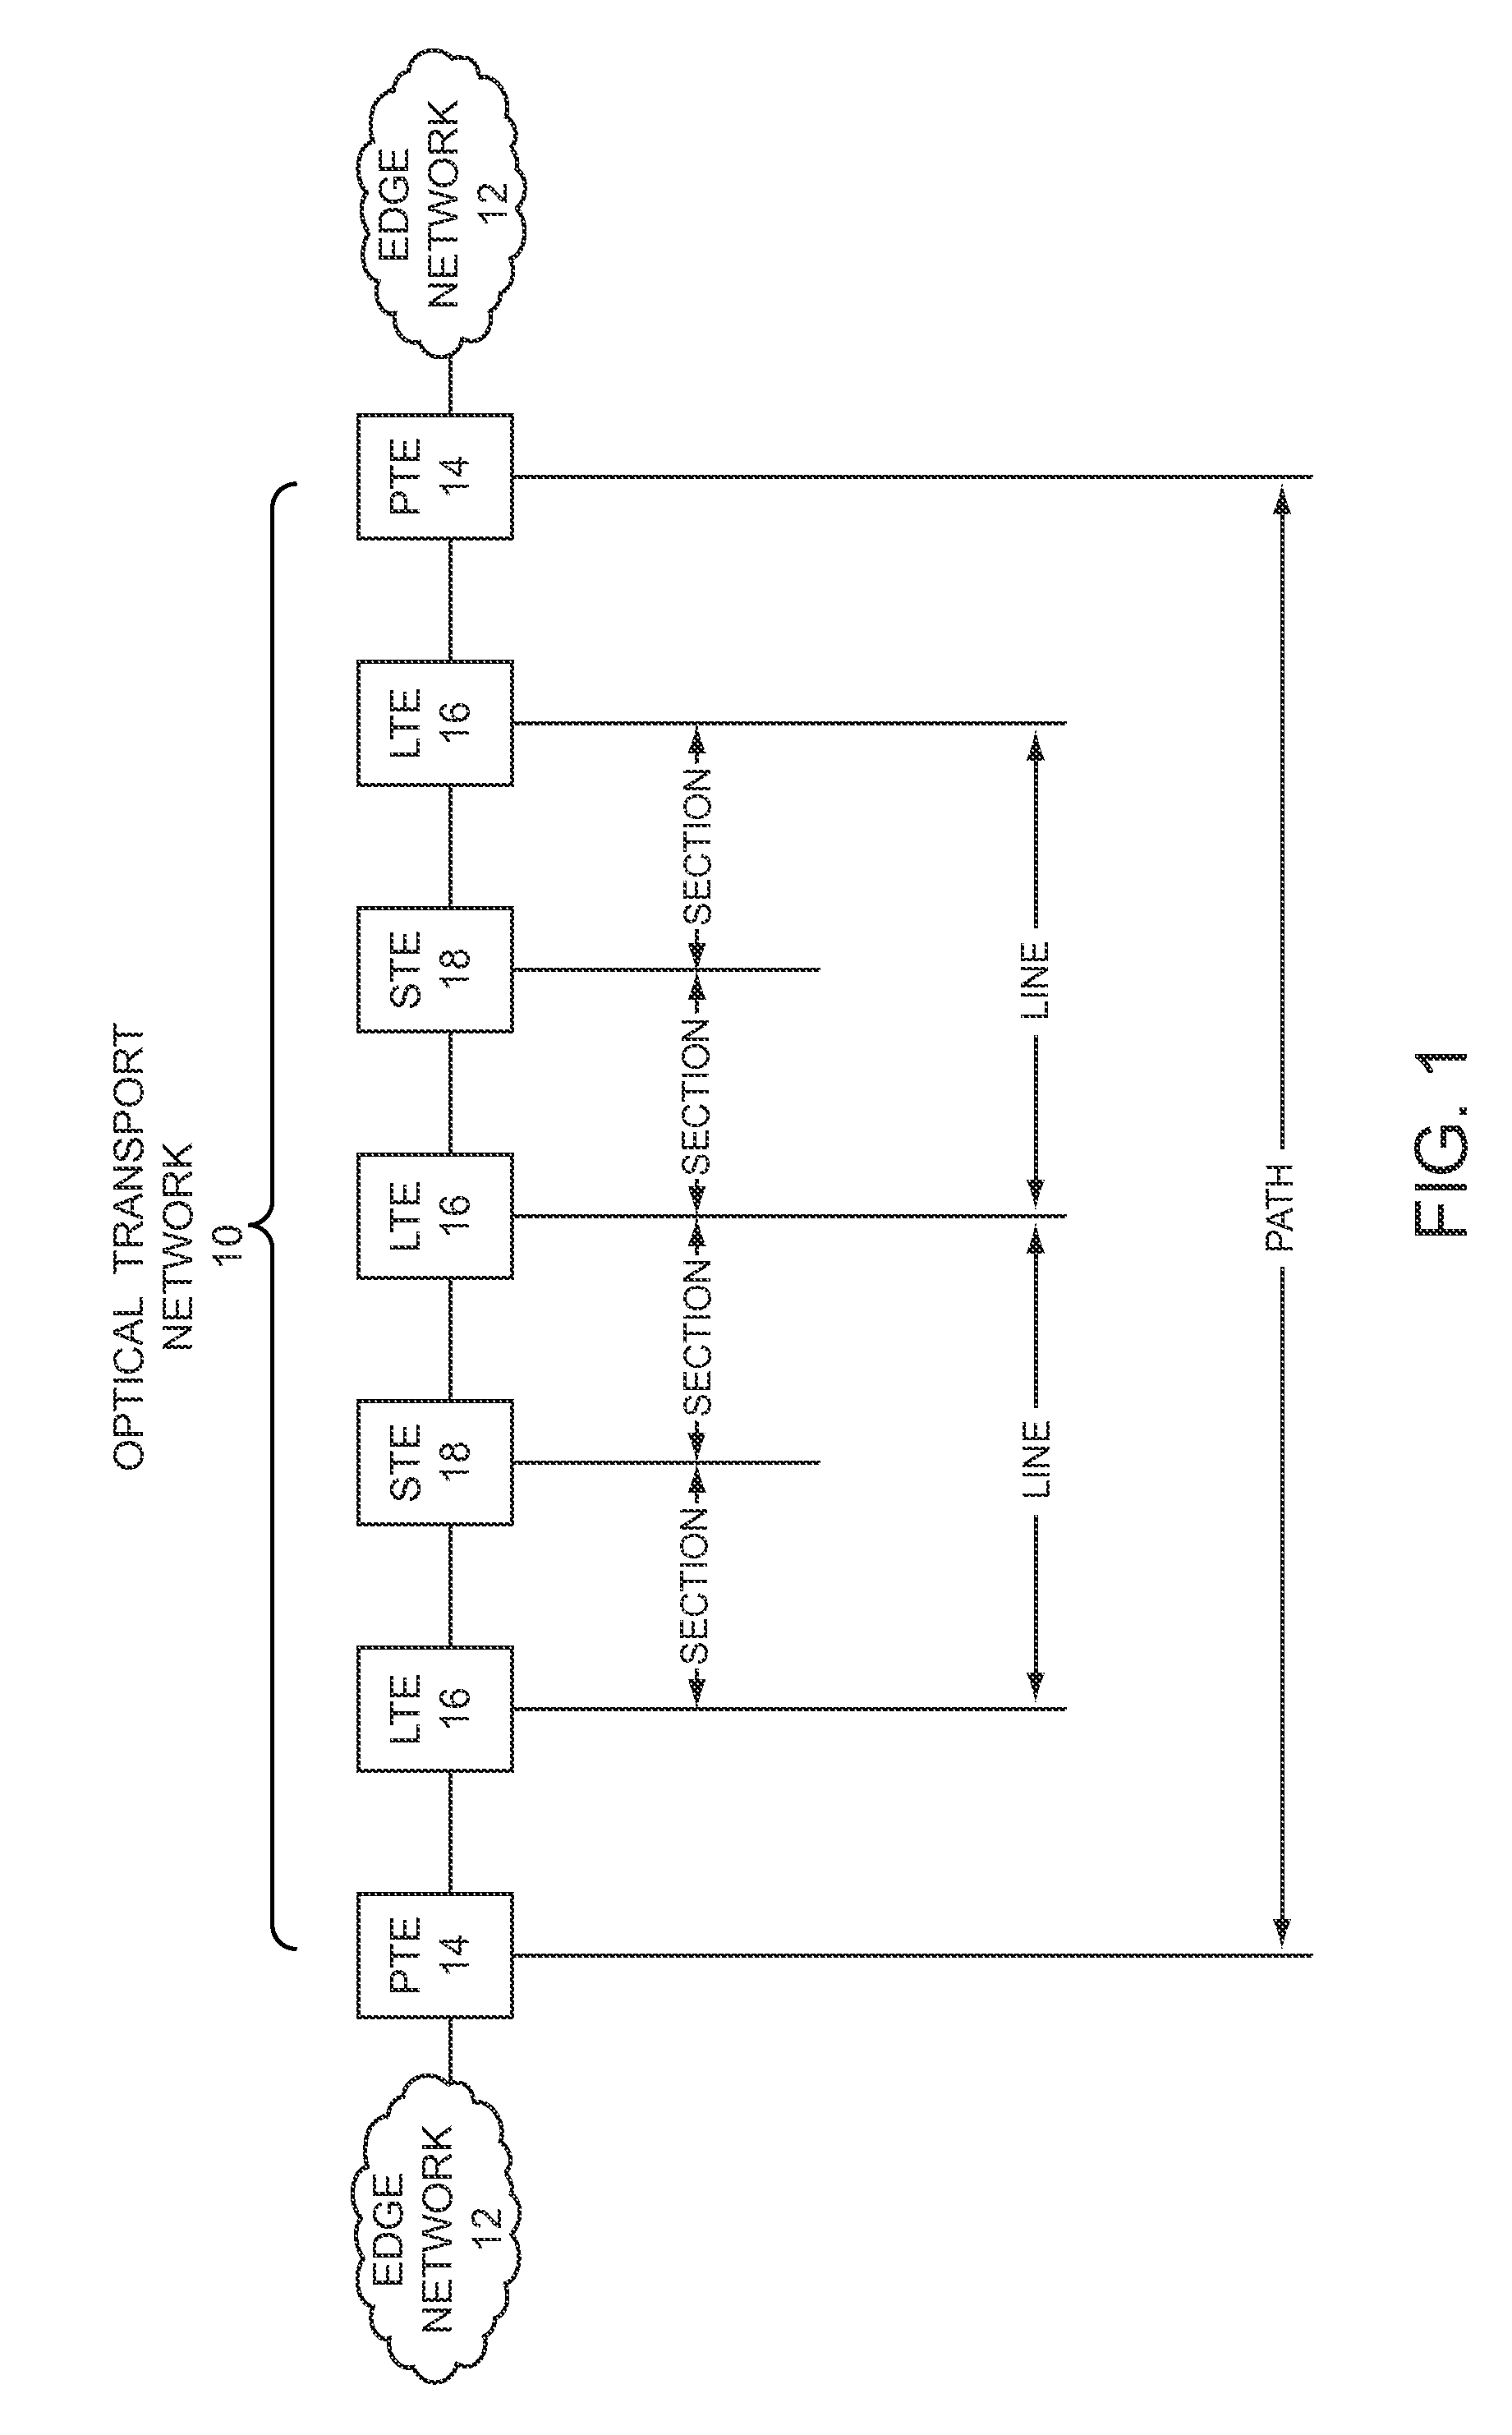 Controlling session keys through in-band signaling